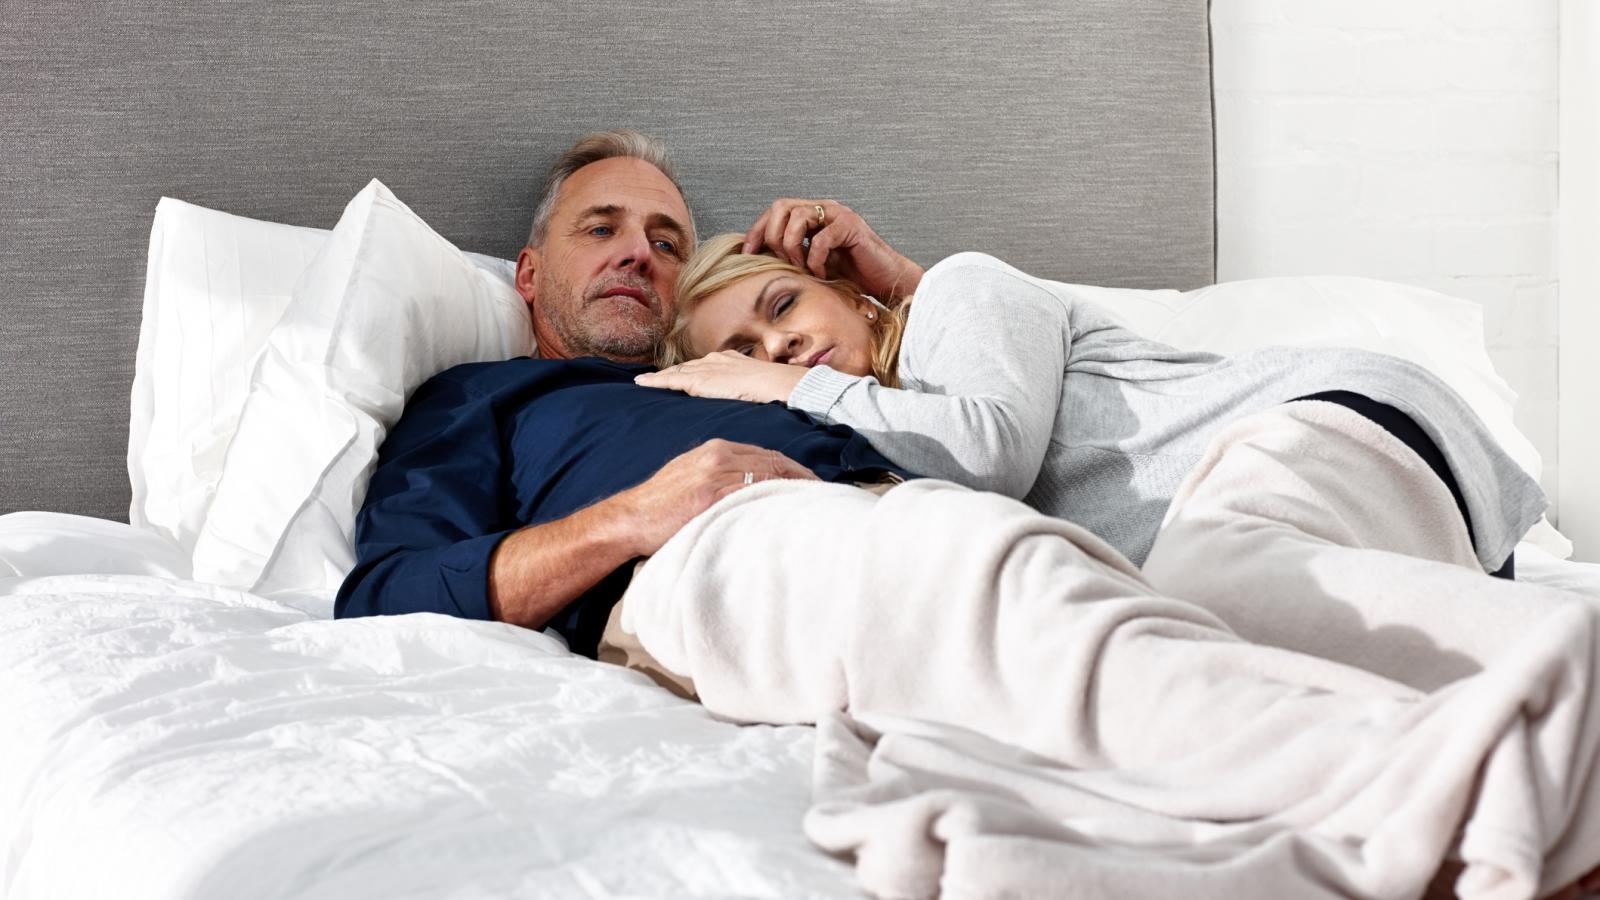 Mature man and woman cuddling in bed. The woman looks a bit worried.